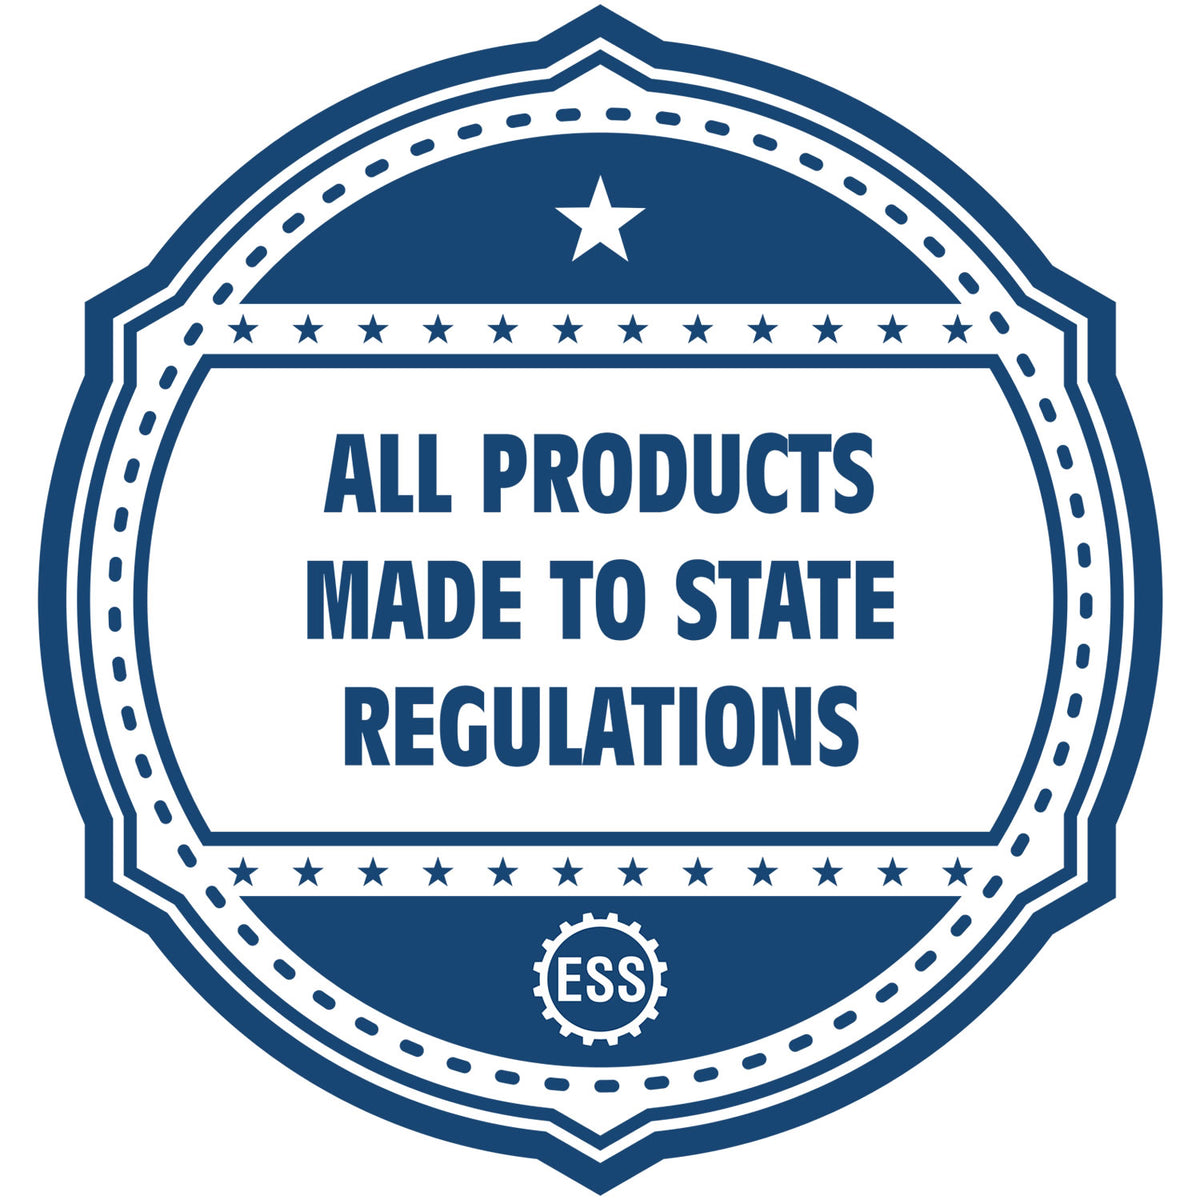 An icon or badge element for the Soft Nebraska Professional Engineer Seal showing that this product is made in compliance with state regulations.